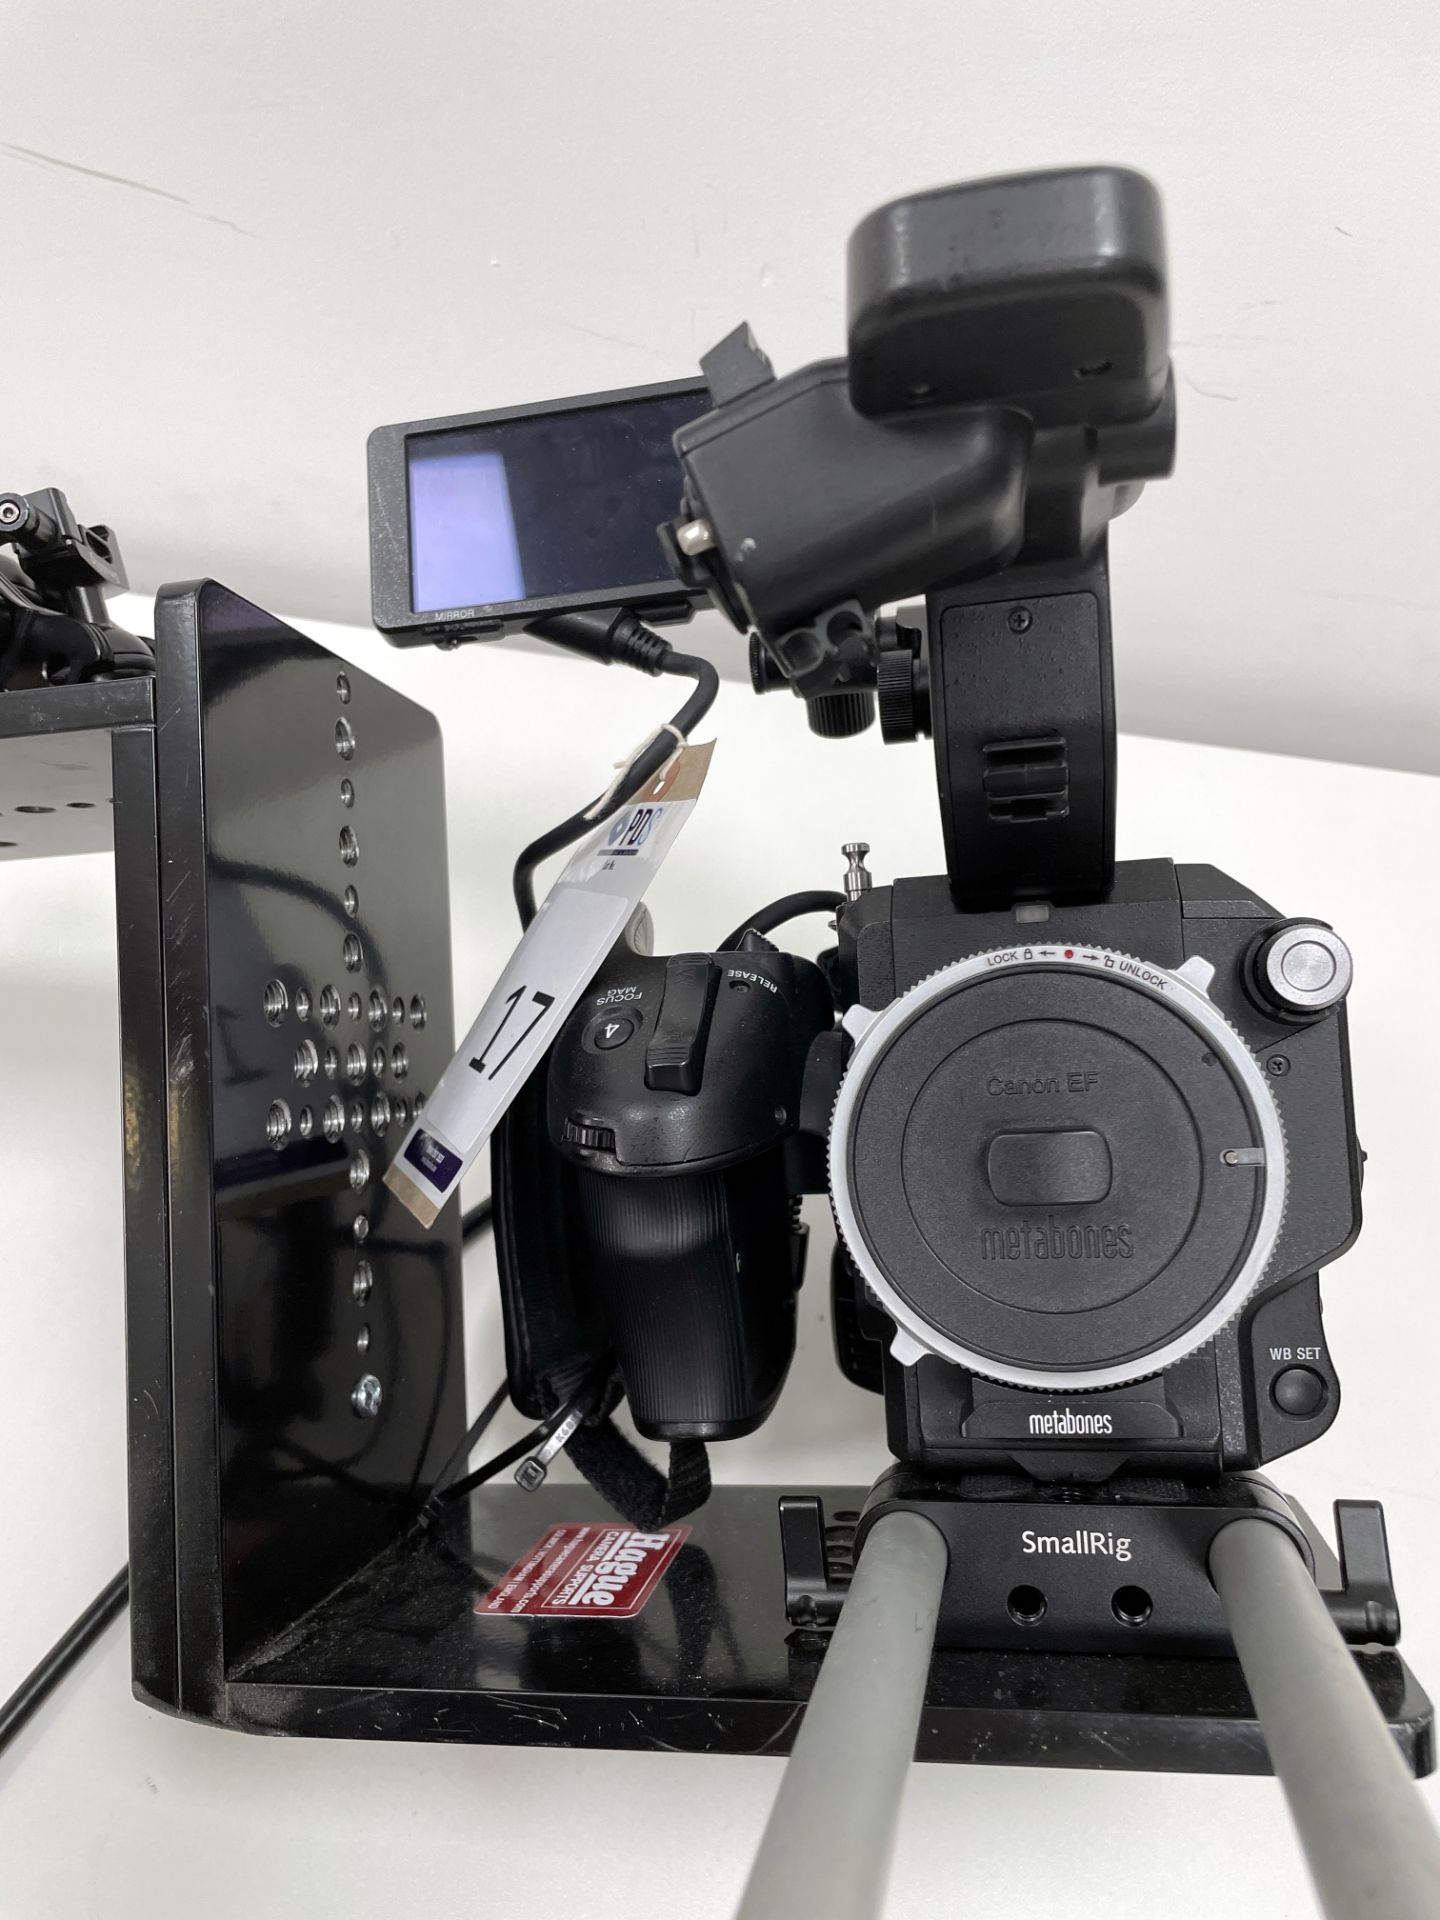 Sony PXW-FS5 Solid State Memory Camcorder Body with Hague Camera Support and Battery, Serial - Image 6 of 6